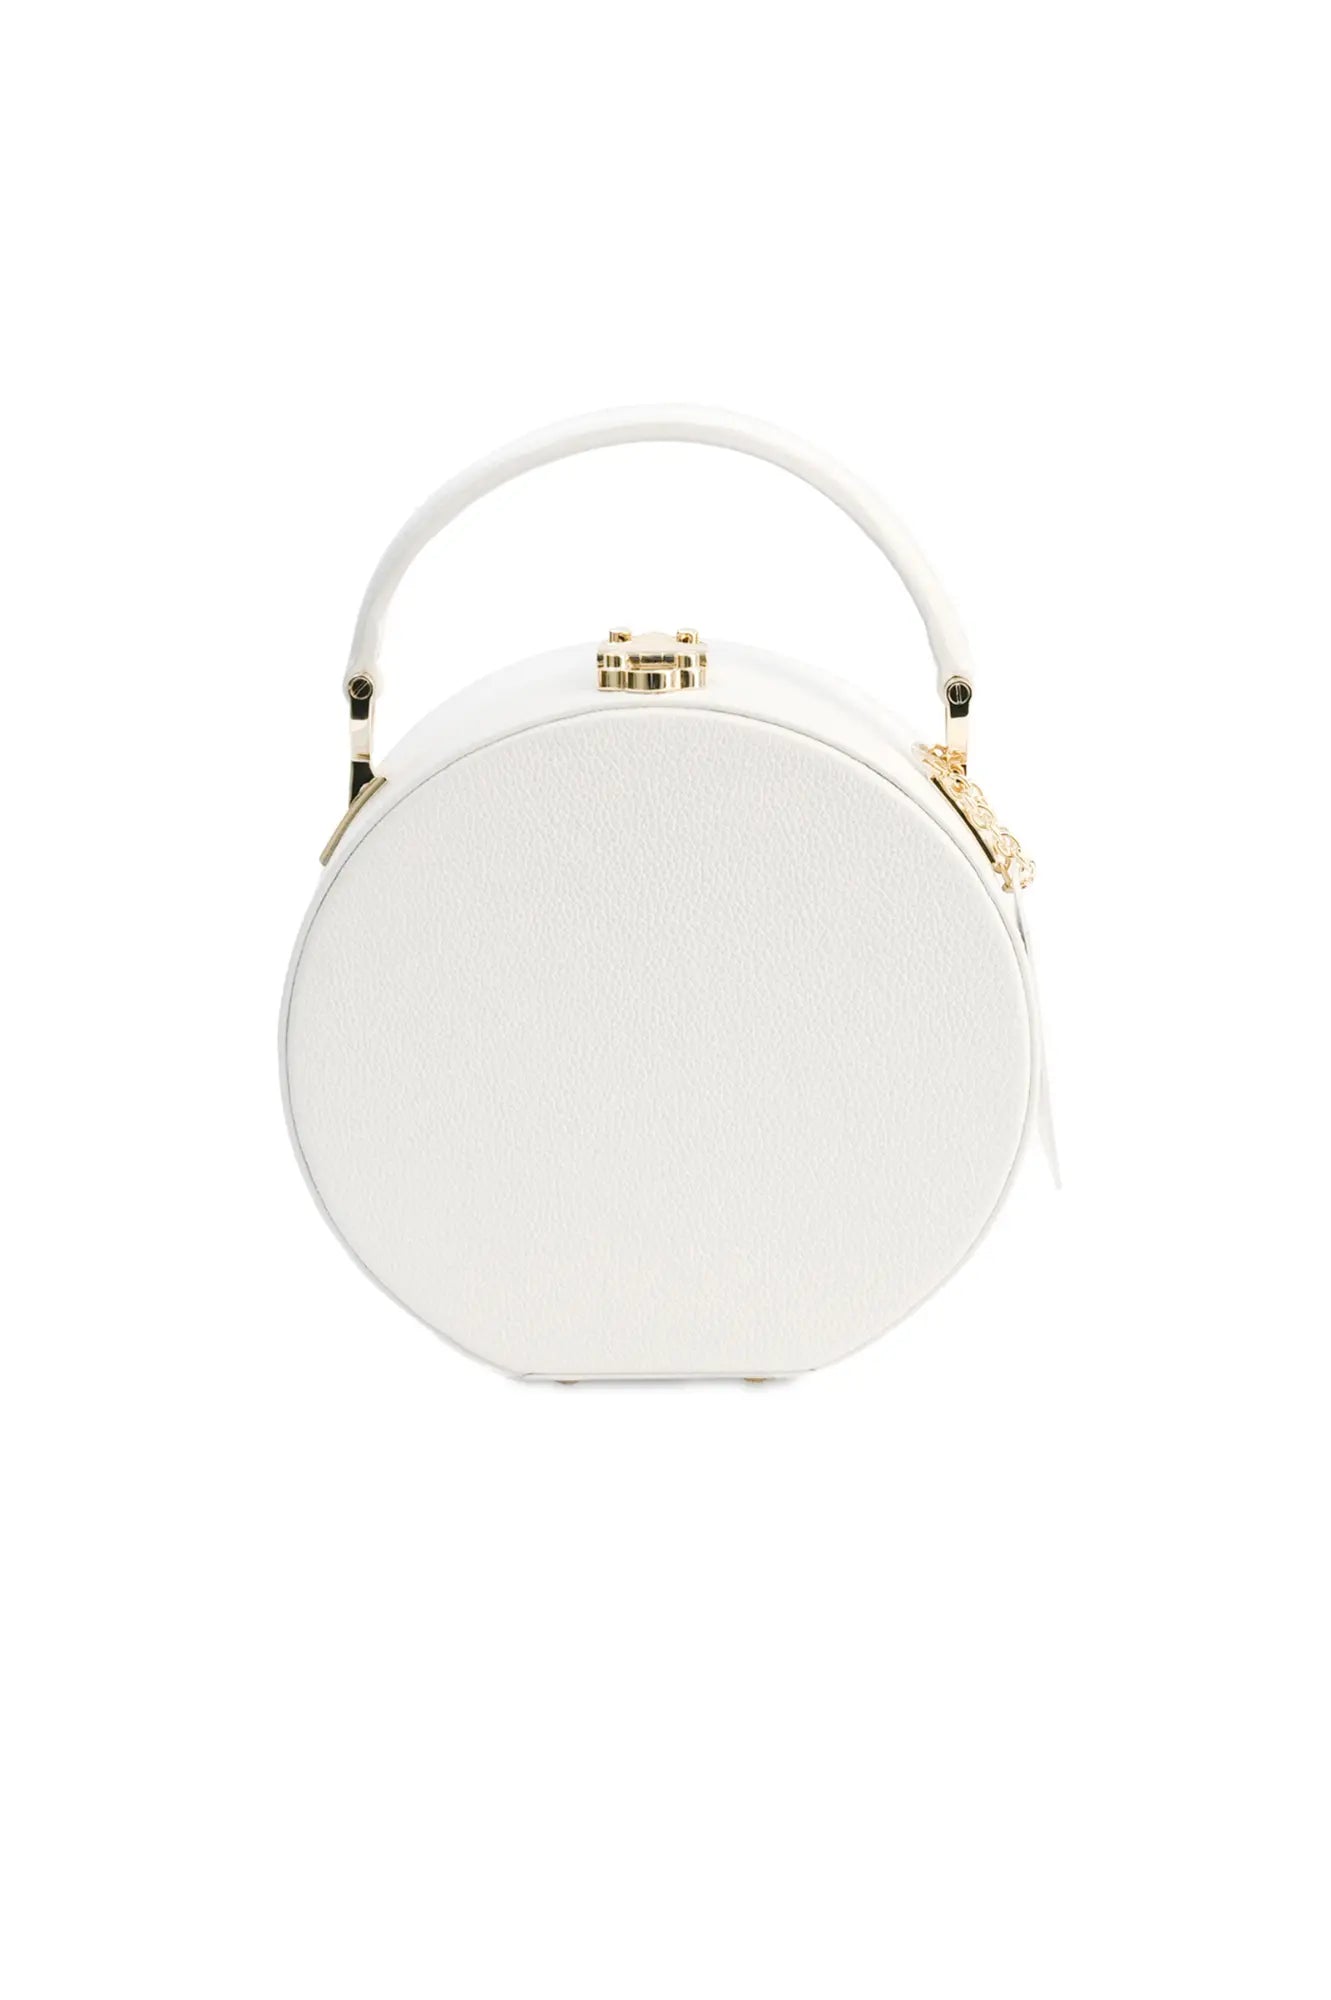 A white round leather handbag with a metallic clasp from The Bella Rosa Collection&#39;s Original Hat Box, on a white background.